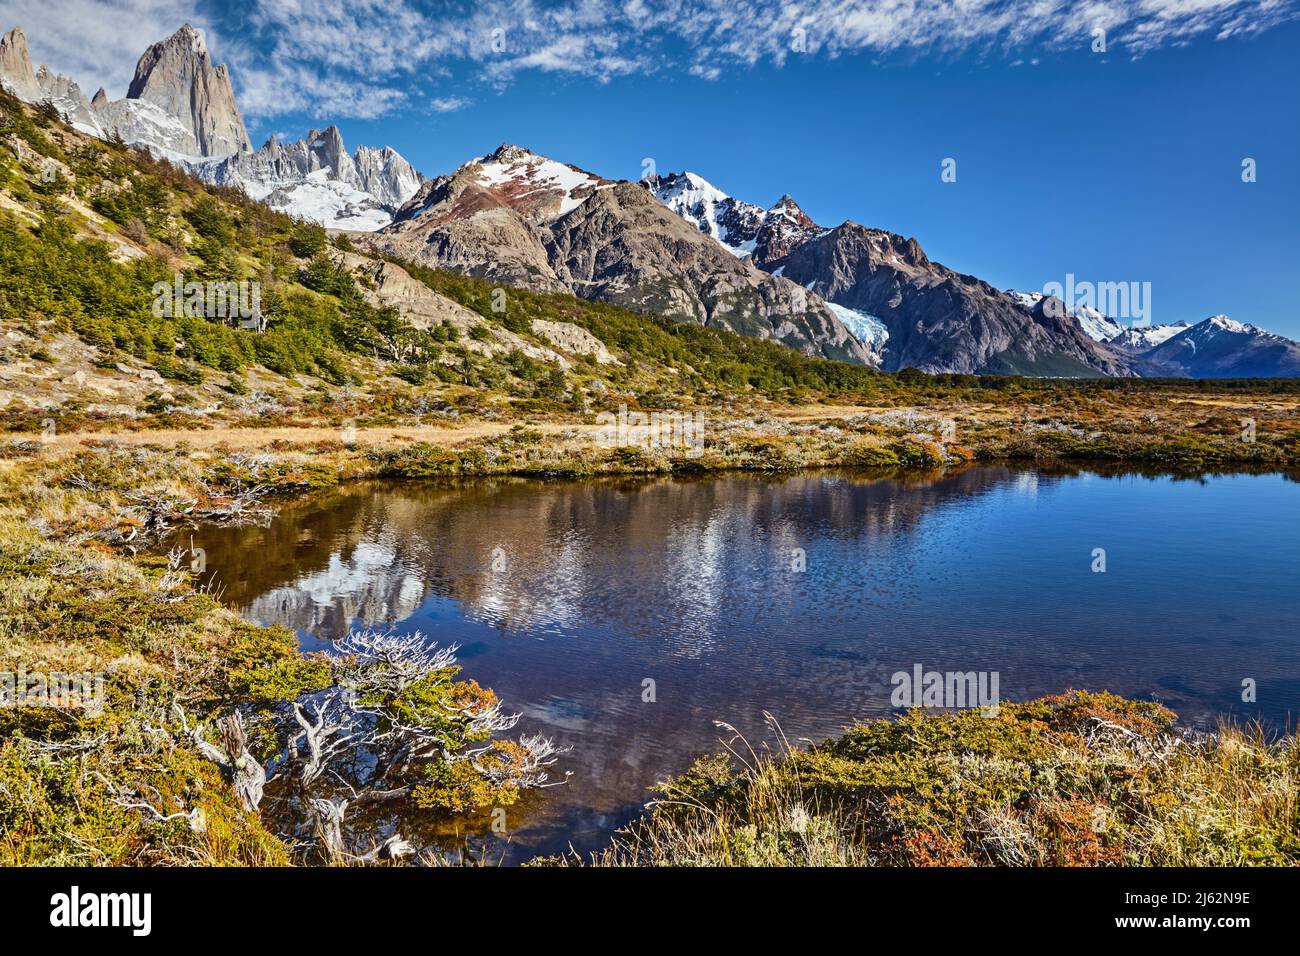 Mount Fitz Roy with reflection in small tarn lake , Los Glaciares National Park, Patagonia, Argentina Stock Photo